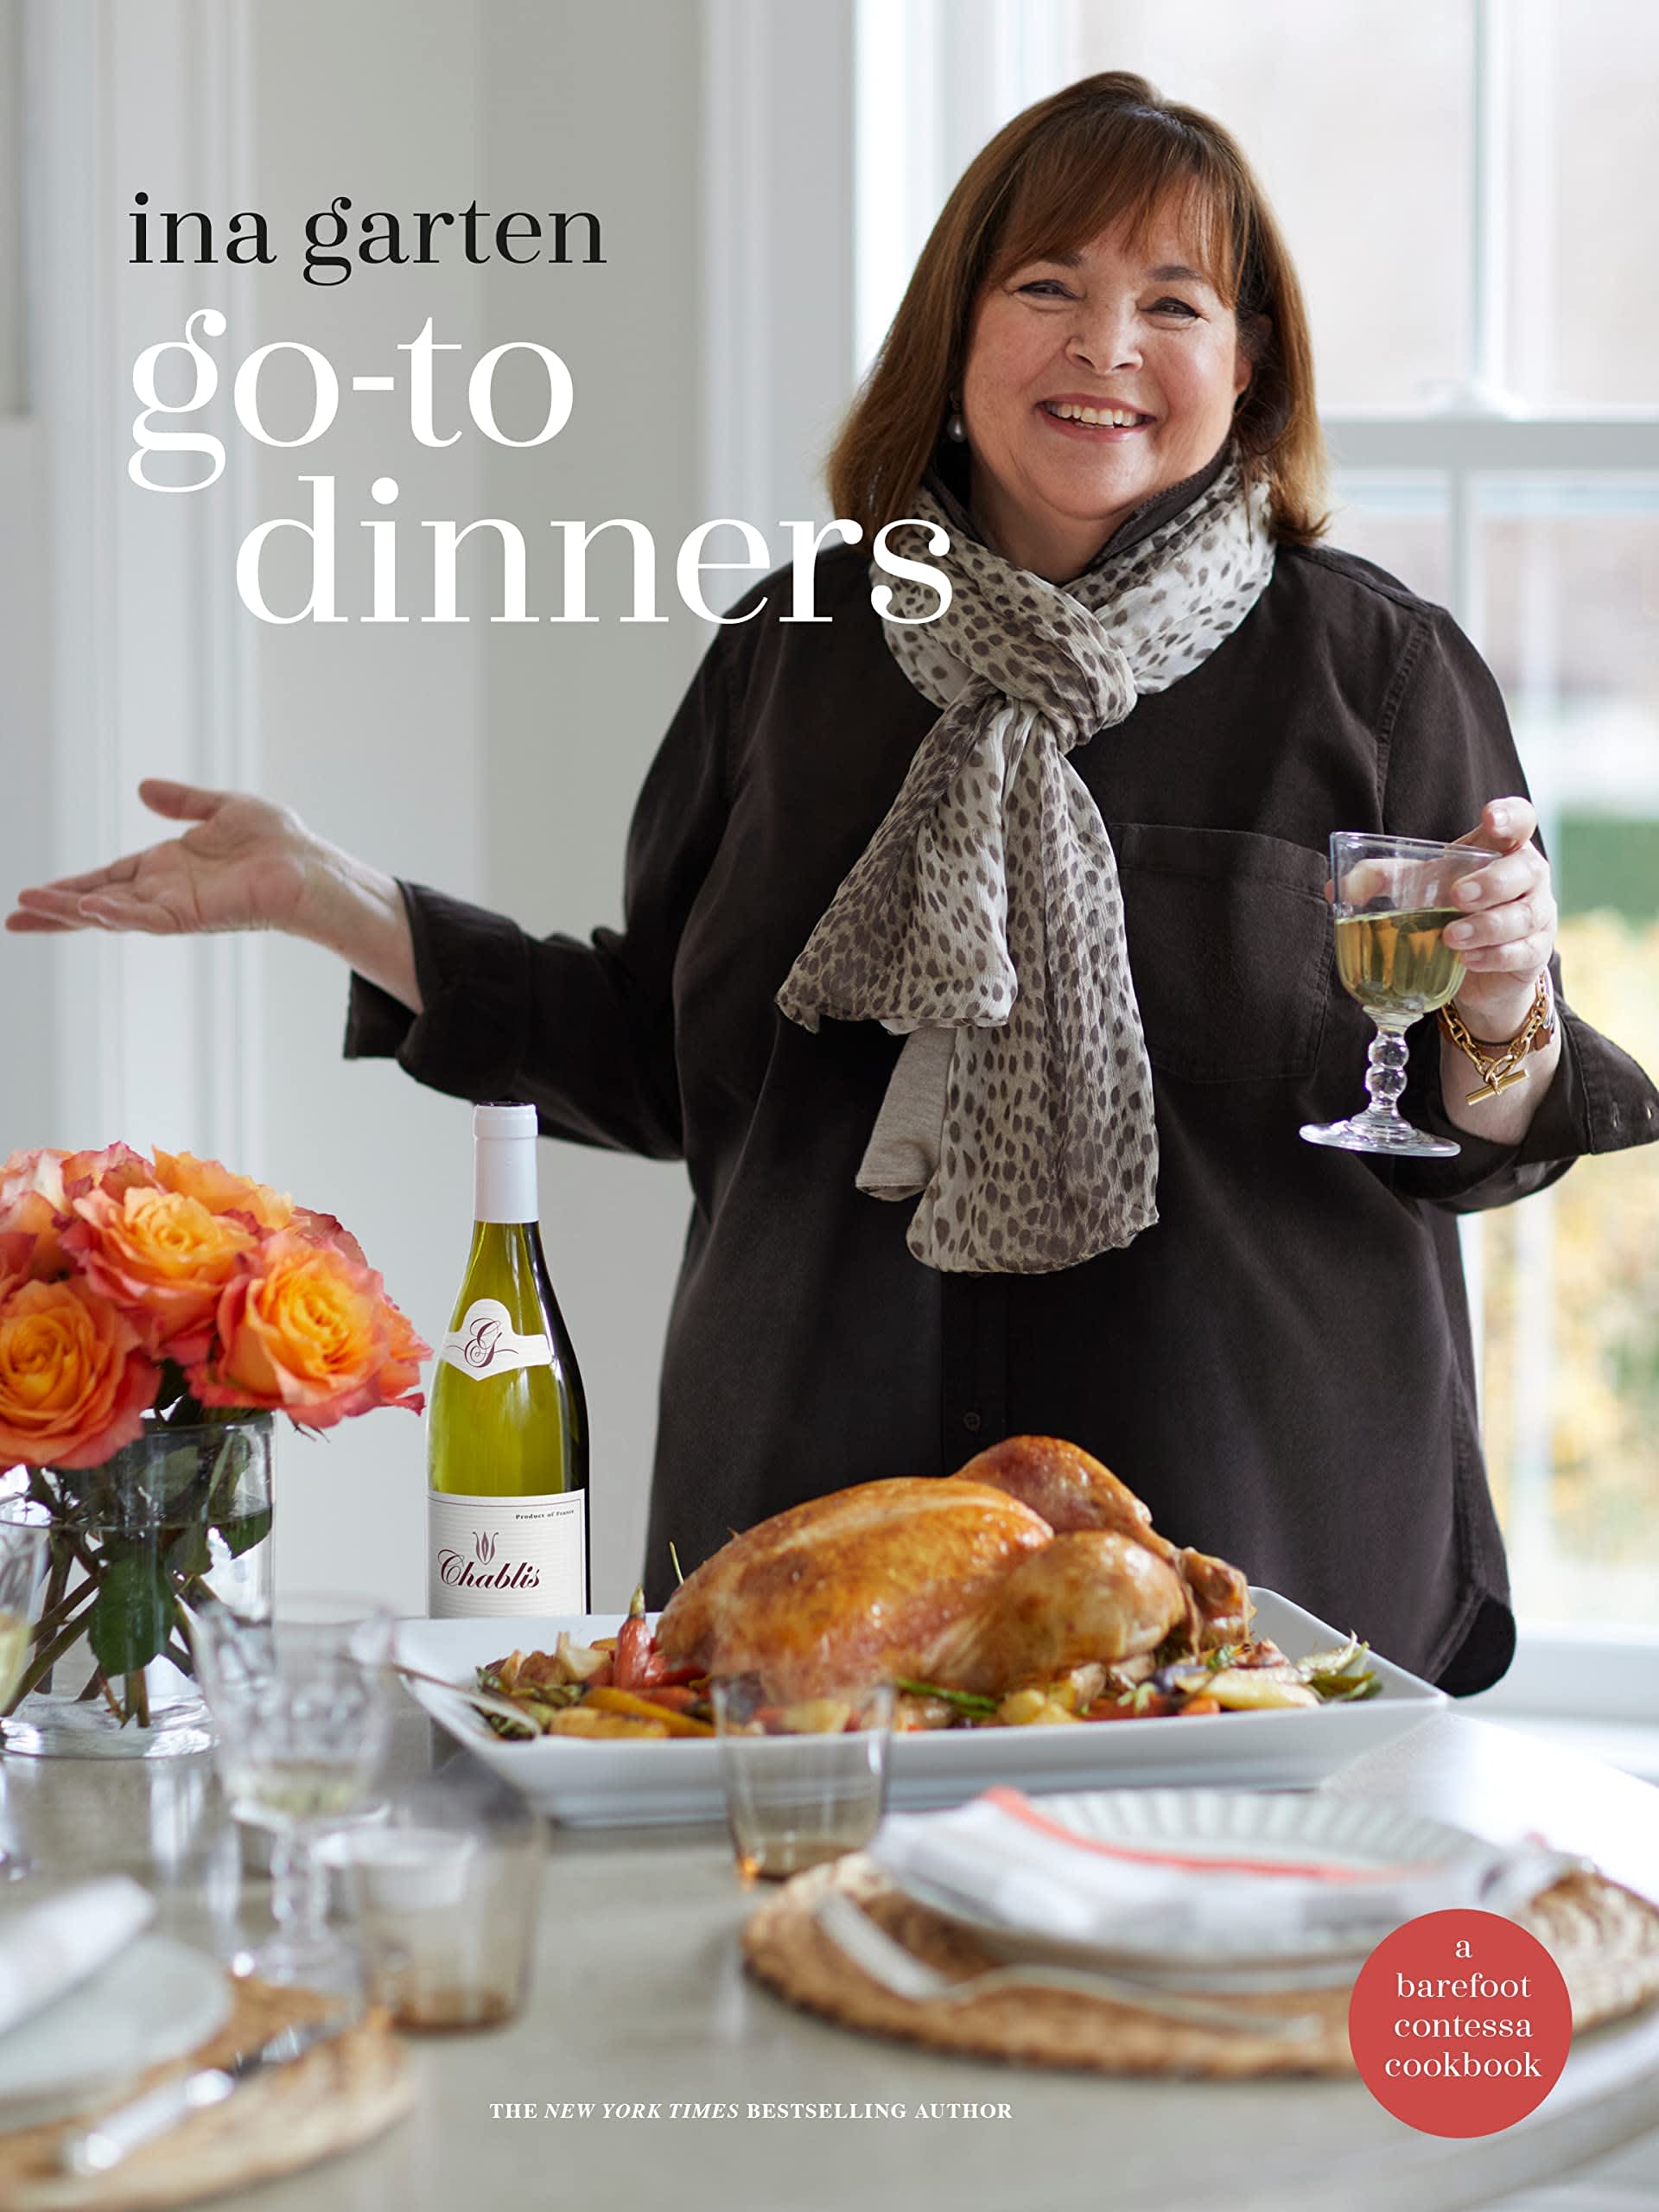 The Best Ina Garten-Approved Kitchen Gifts for Foodies – SheKnows